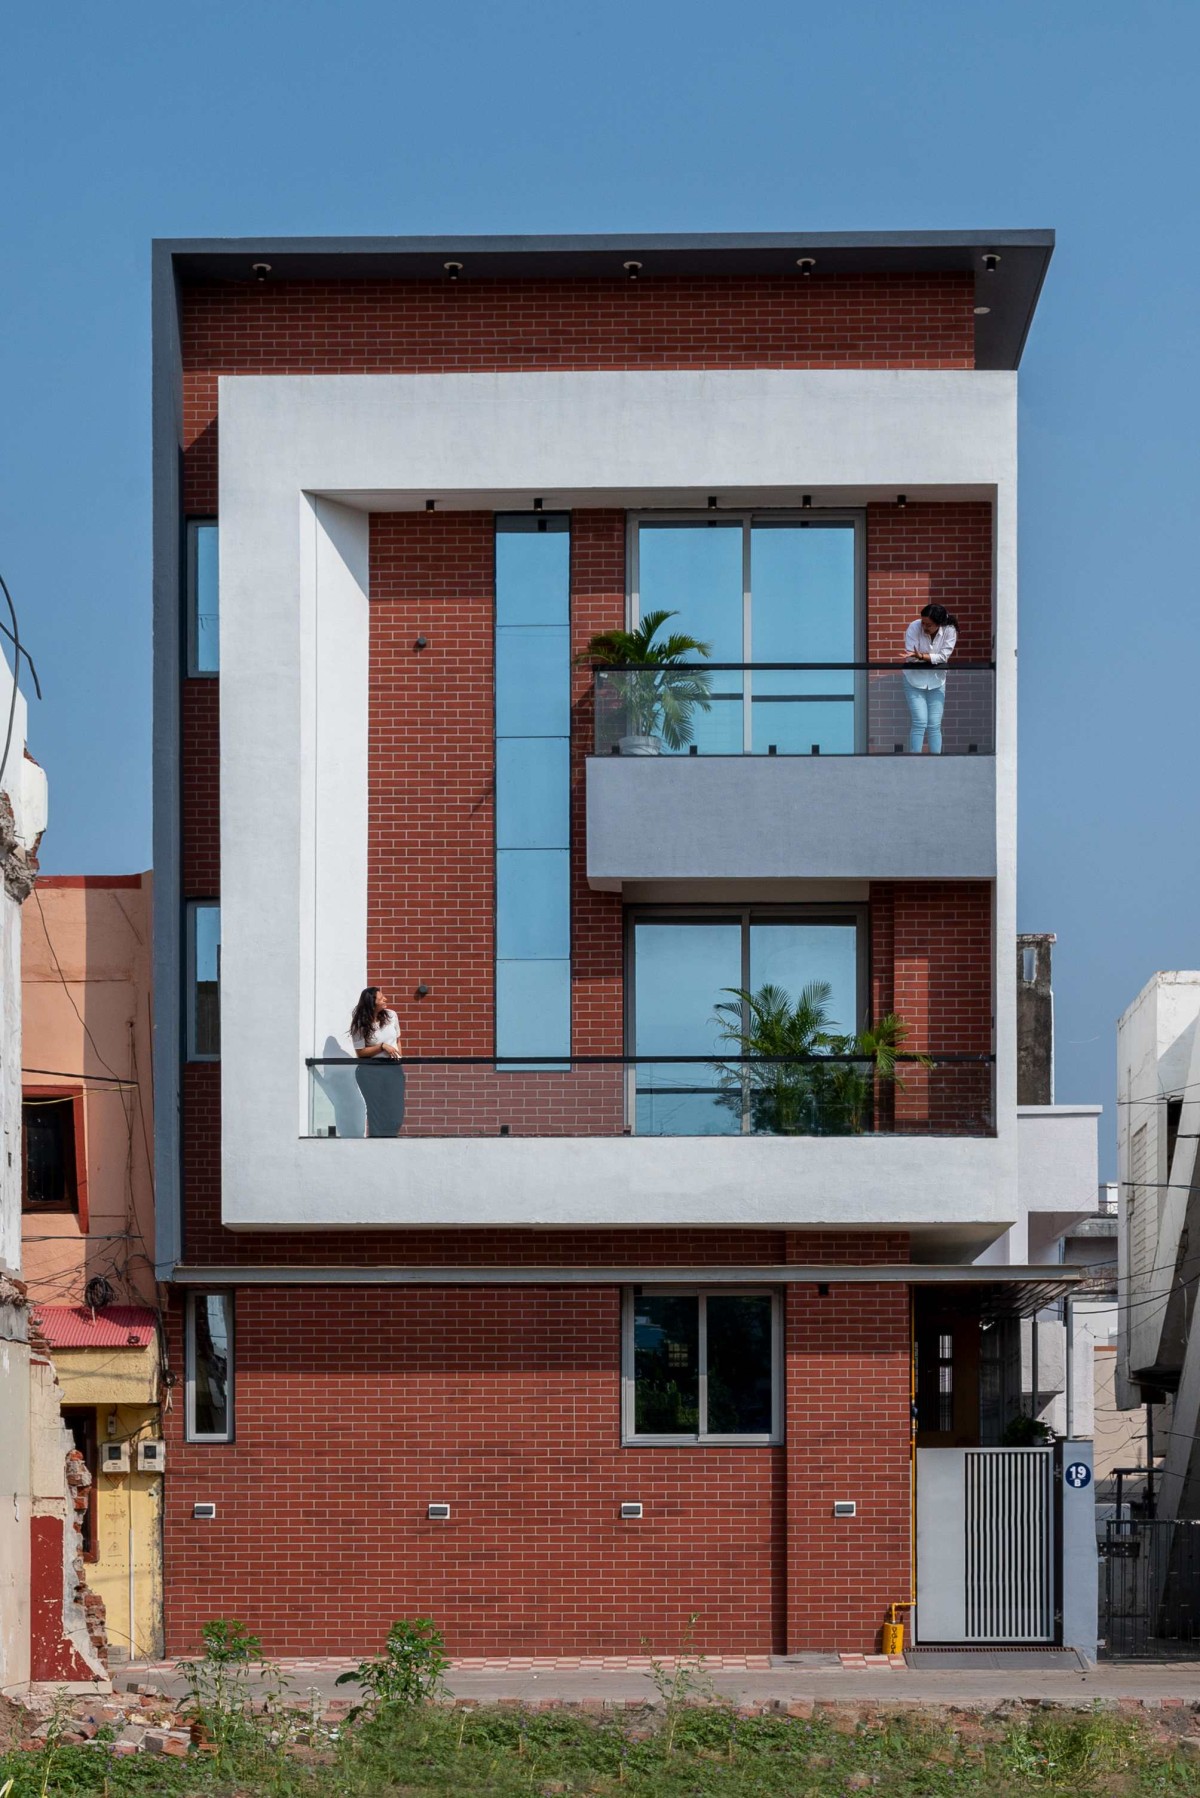 Exterior view of Parekh's Residence by J Architects